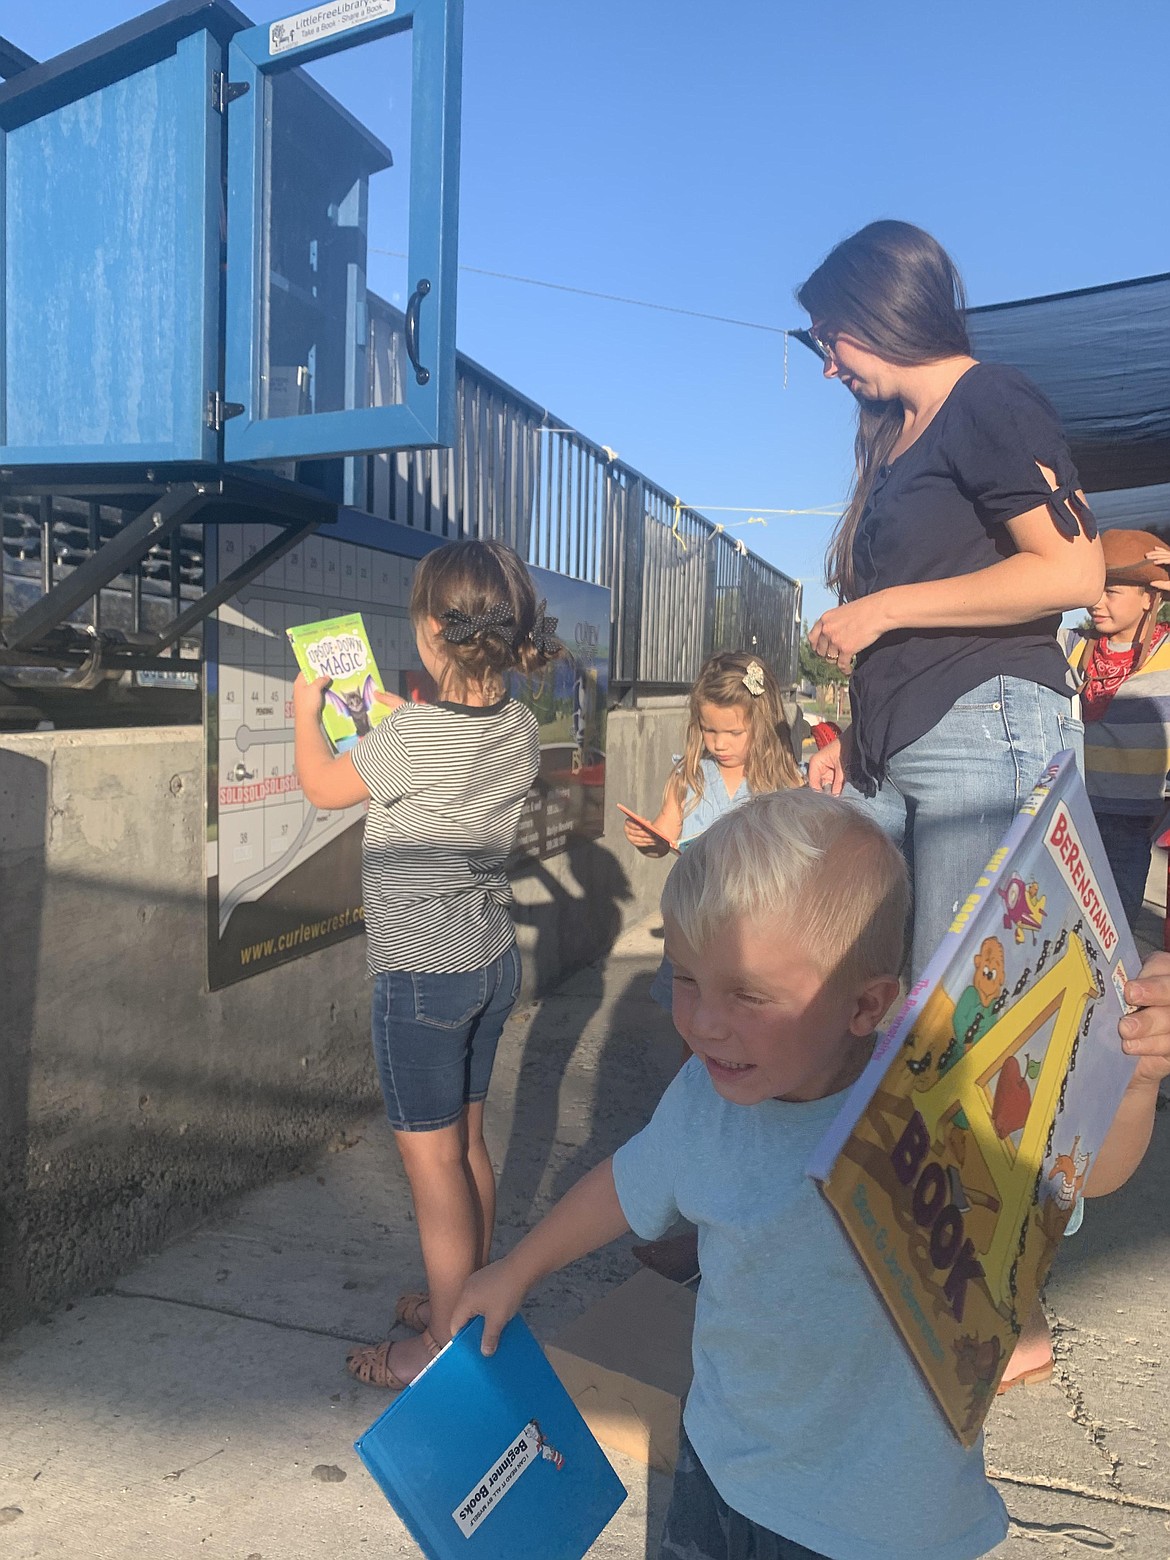 Louis Larsen, front, walks away from the Little Free Library with a smile and books in hand, while Tia Allred and her two daughters pick out books behind him.